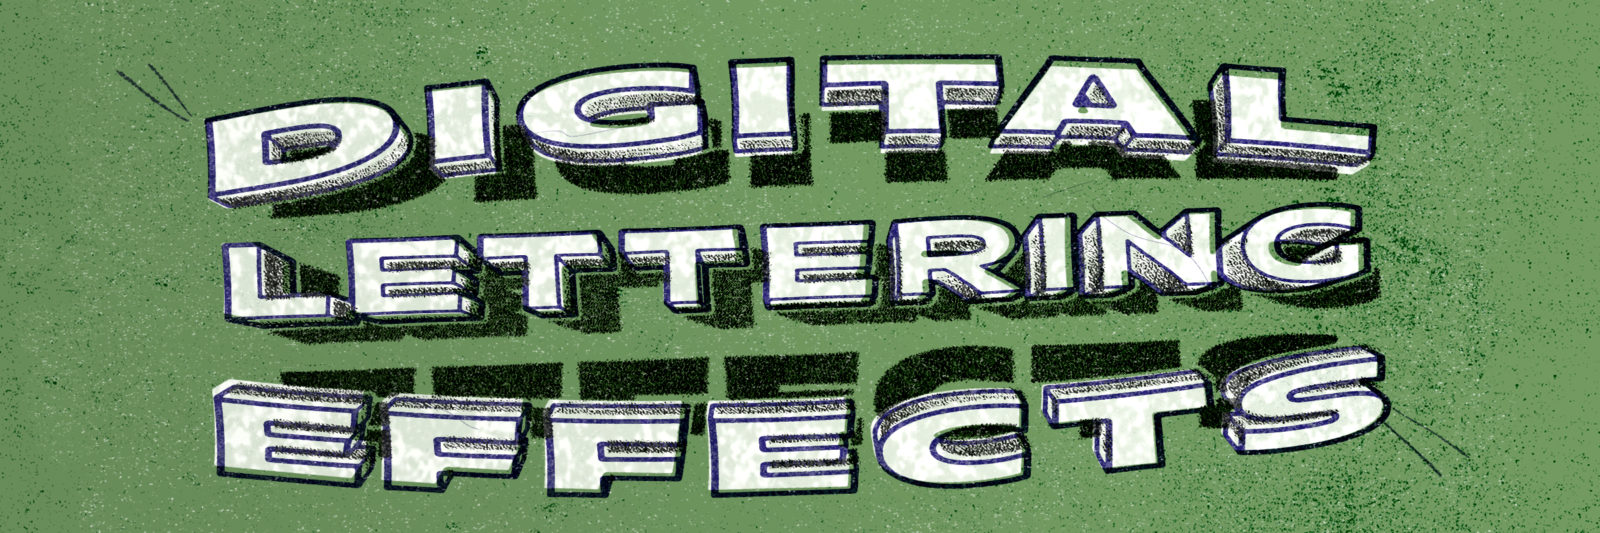 Typographics Digital Lettering Effects Coopertype org